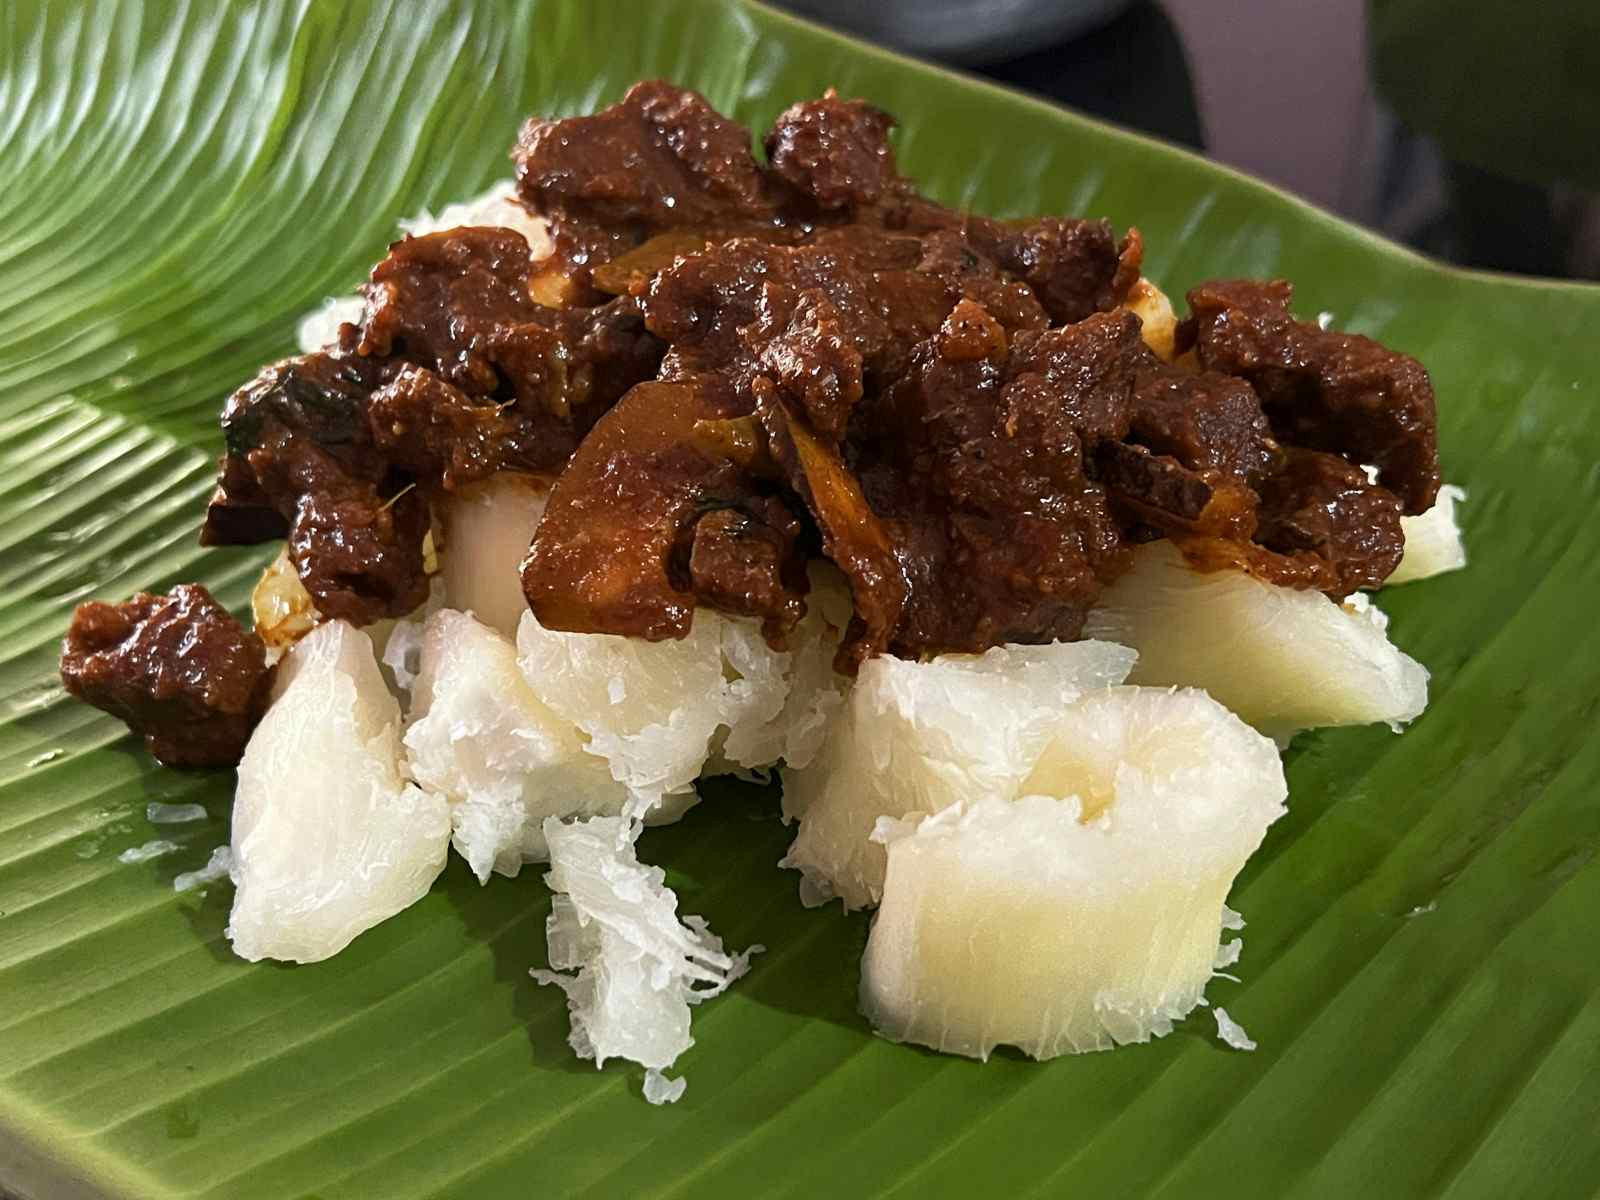 Kerala style beef and tapioca on a banana leaf in Thiruvananthapuram (Trivandrum), Kerala, India, on May 30, 2022 (Creative Touch Imaging Ltd./NurPhoto via Getty Images)